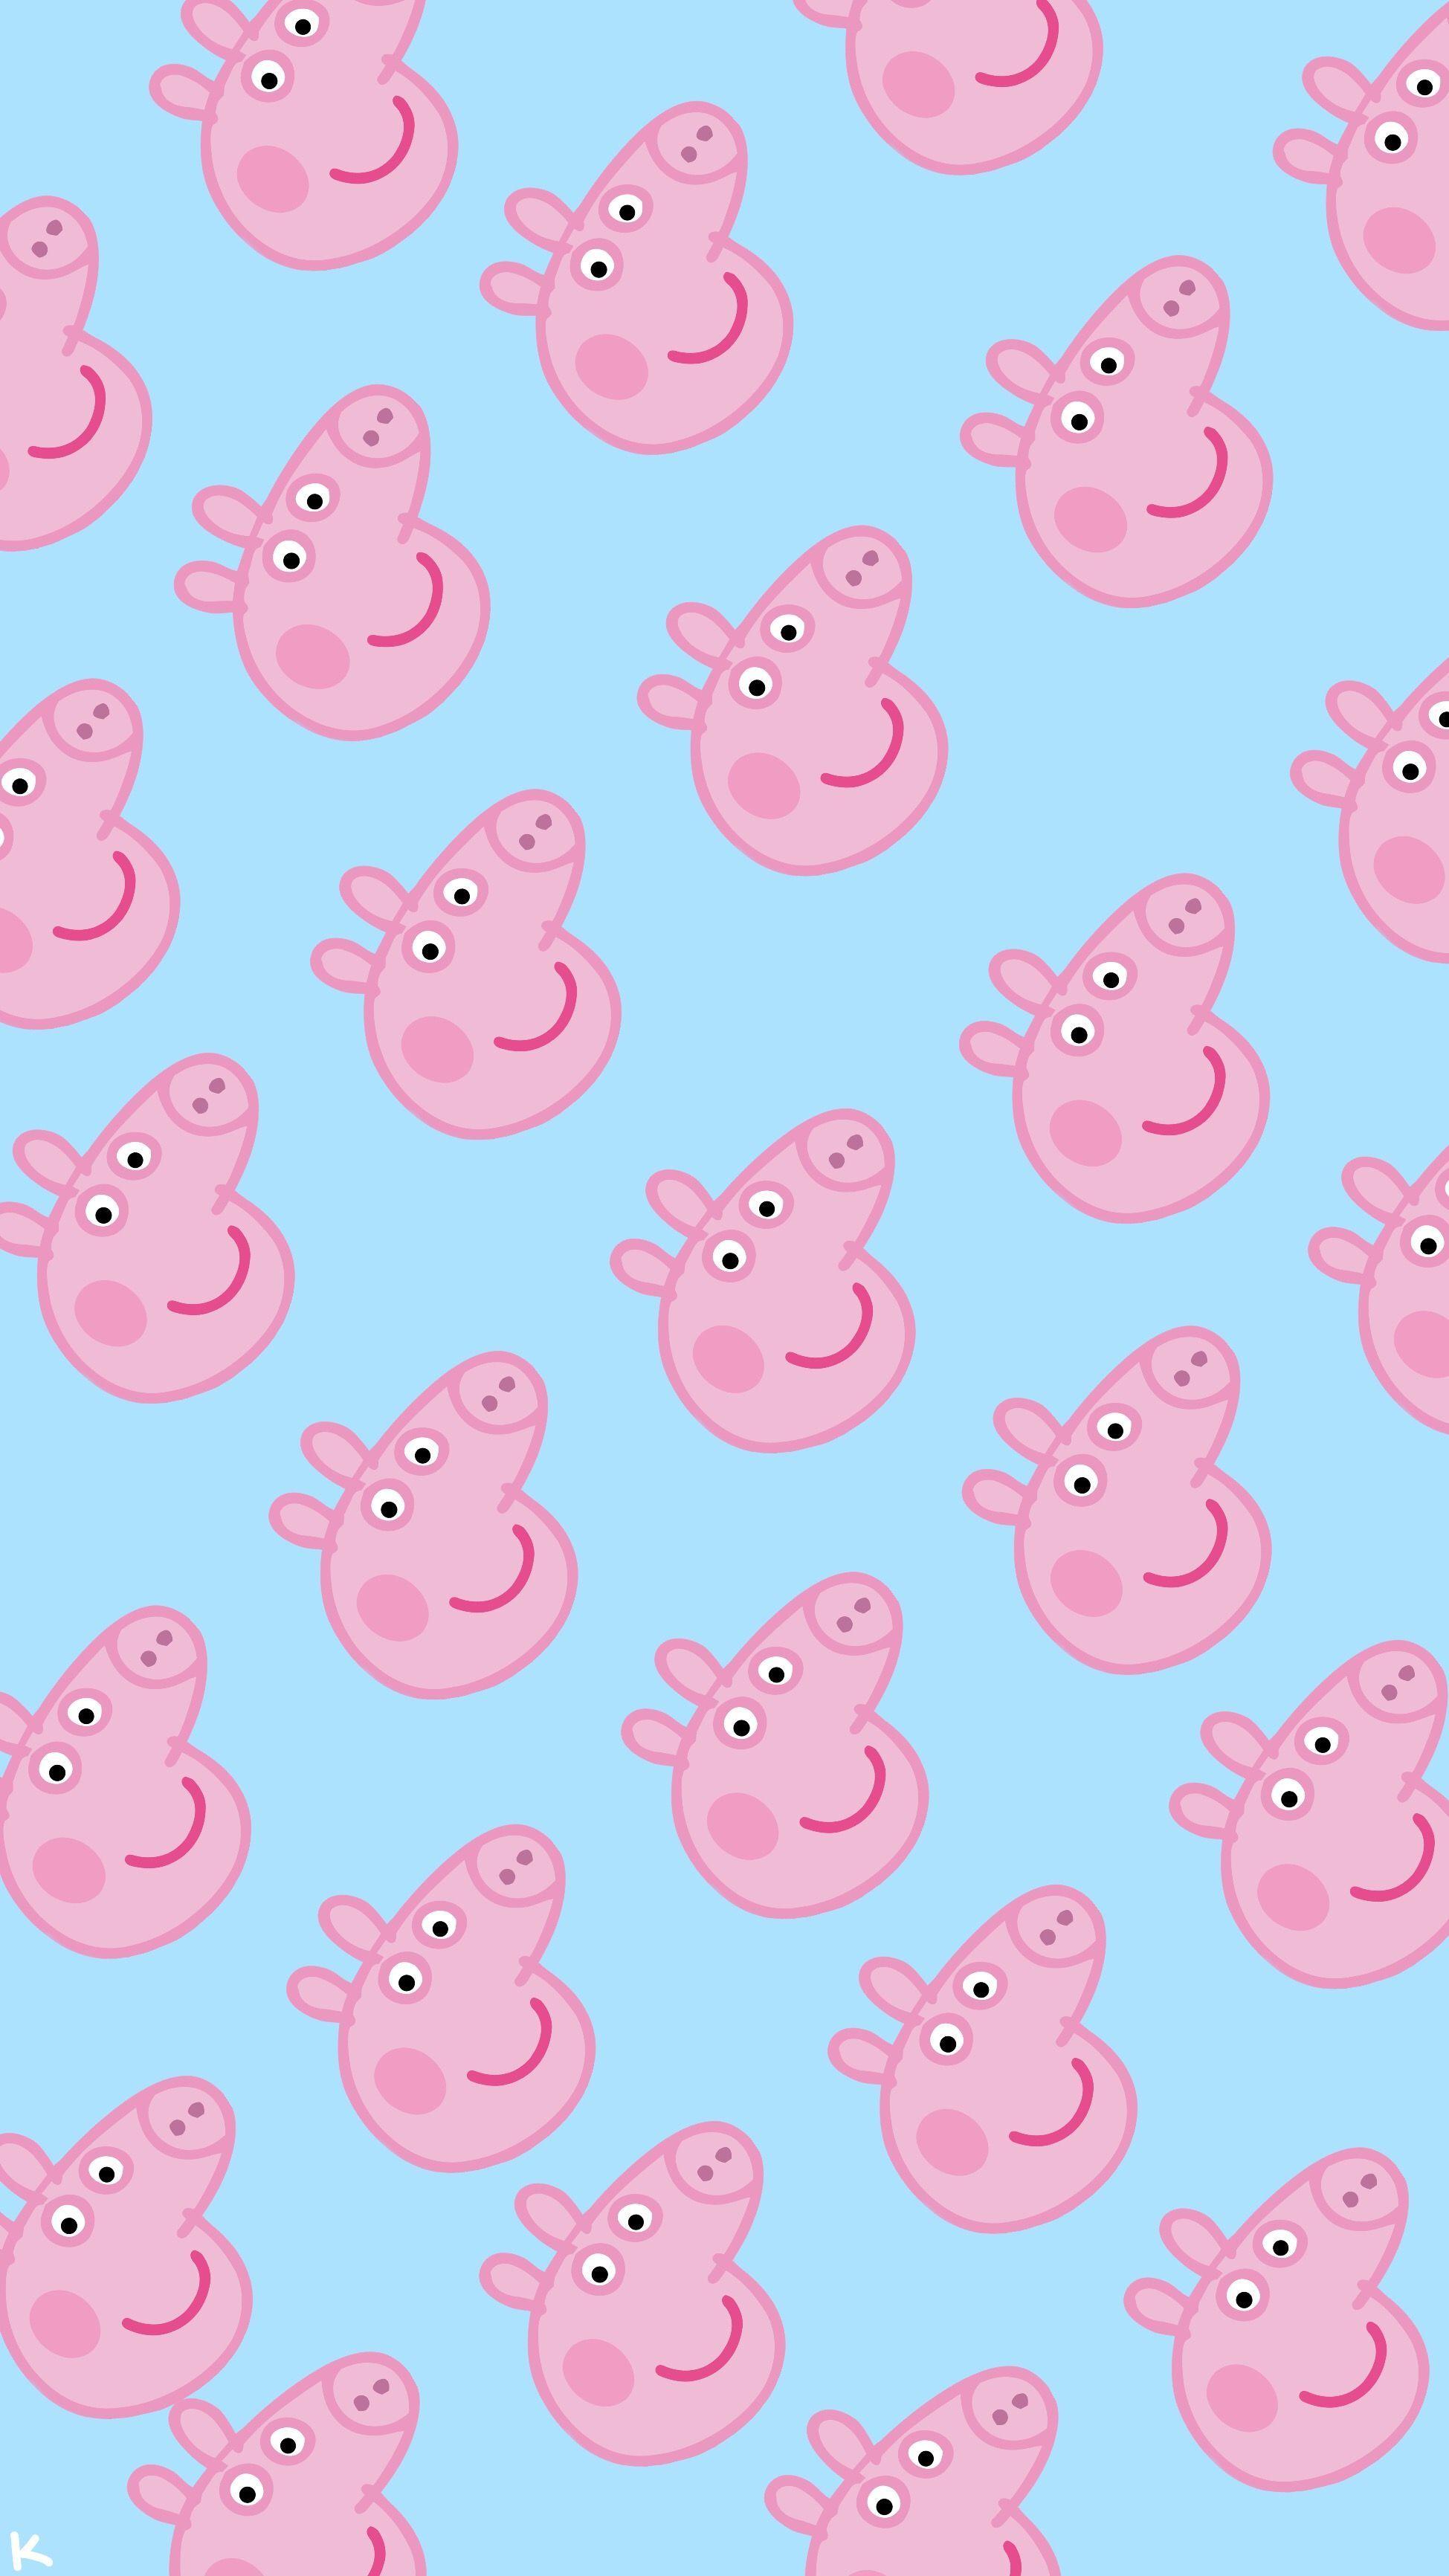 Scary Peppa Pig Wallpapers Wallpaper Cave